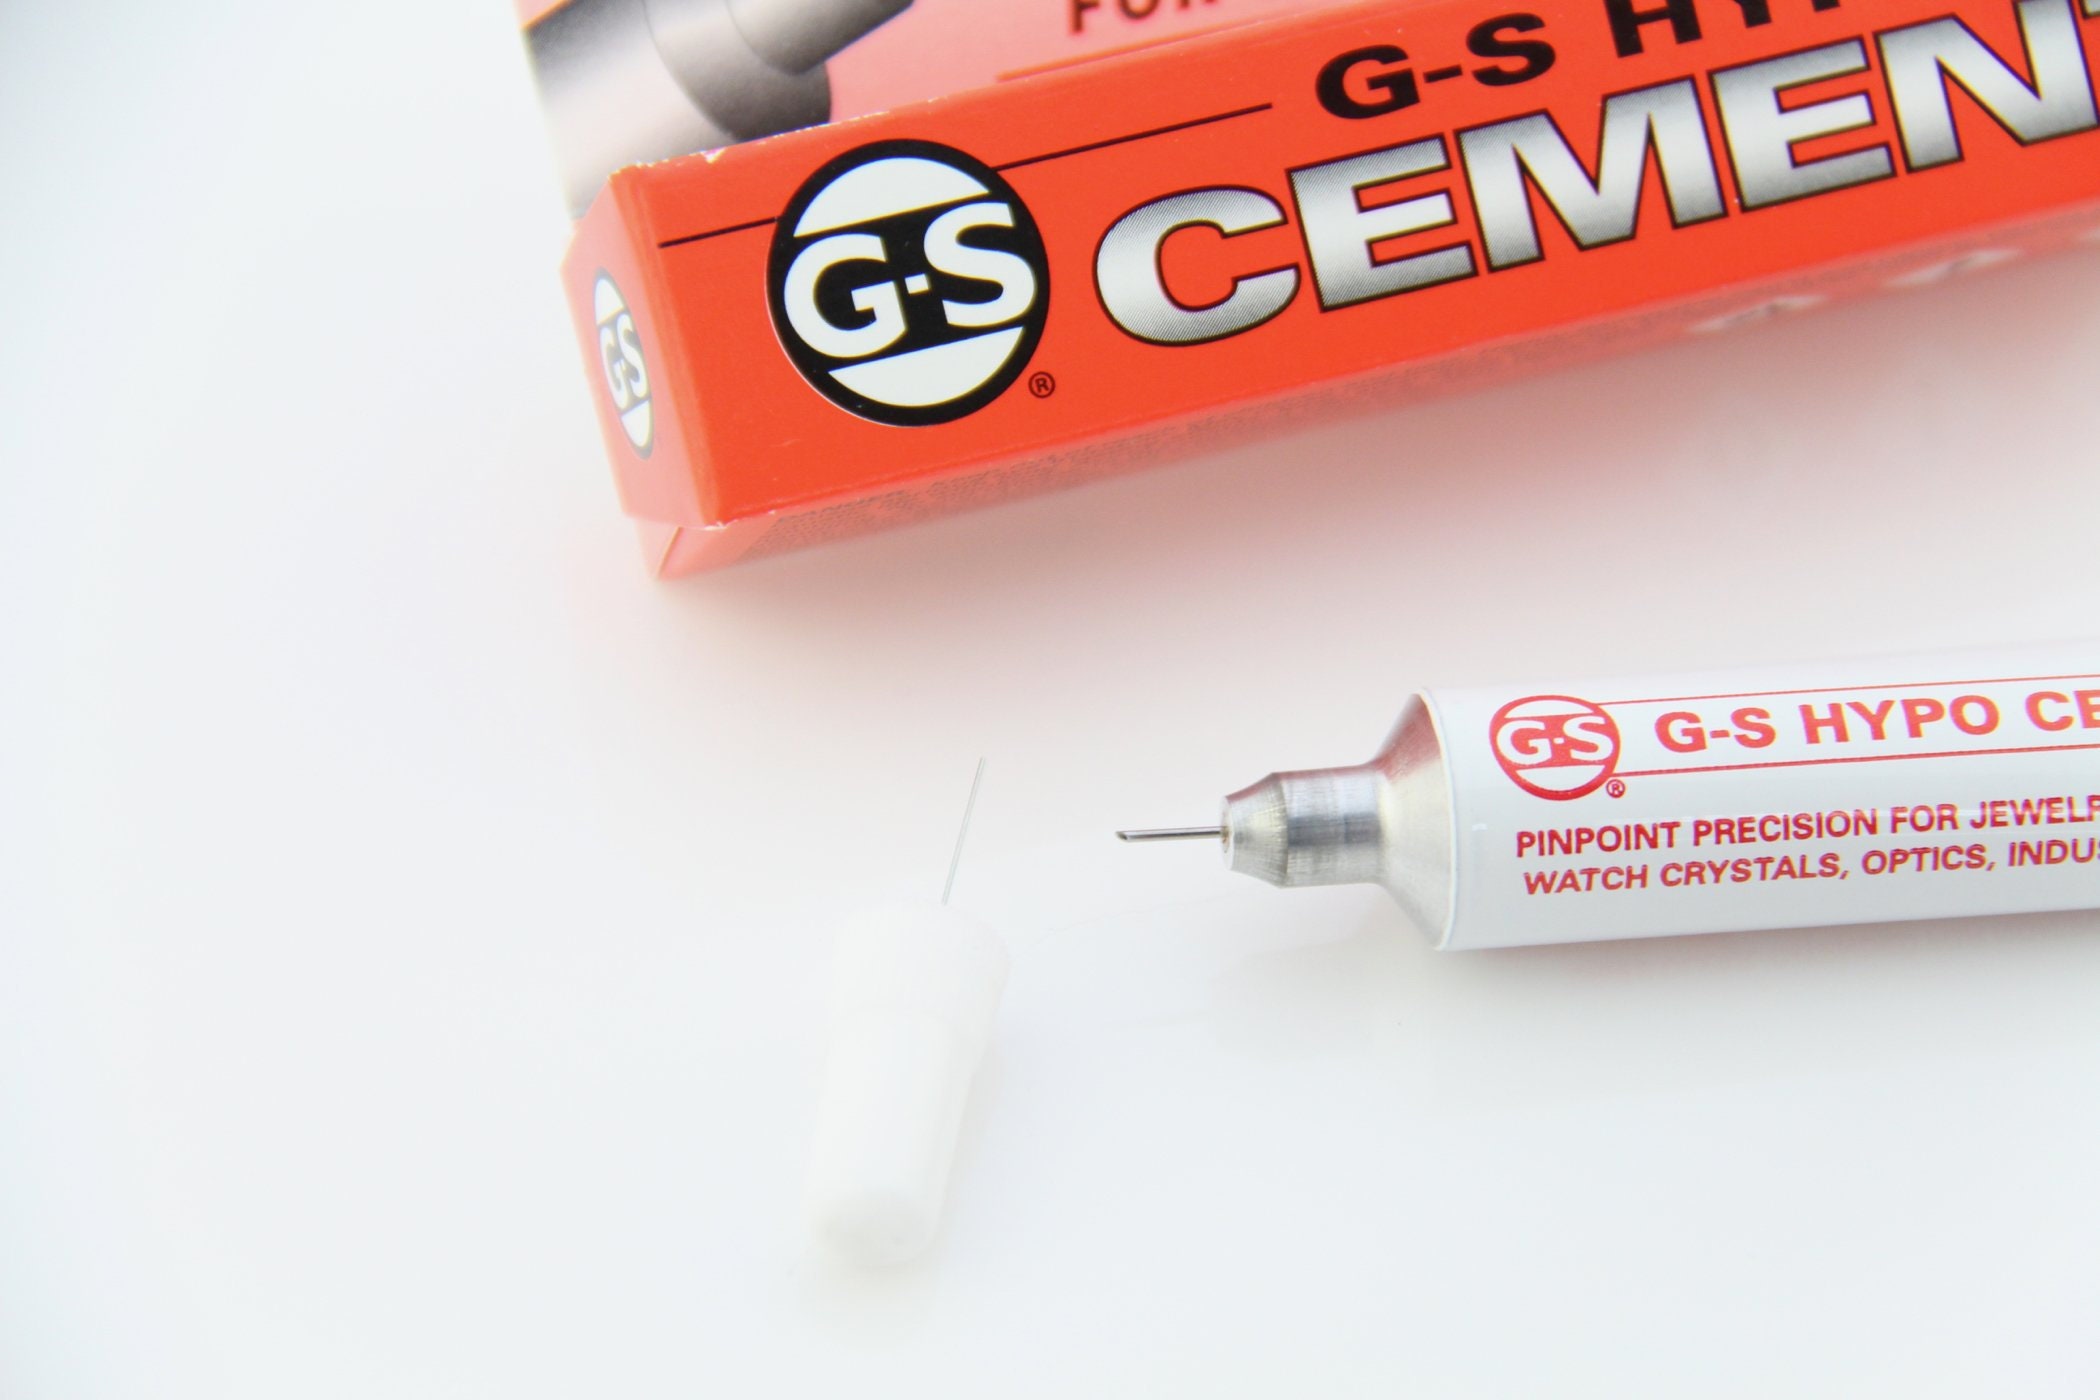 G-S Hypo-cement, Precision Applicator Tip, Glue for Jewelry Making